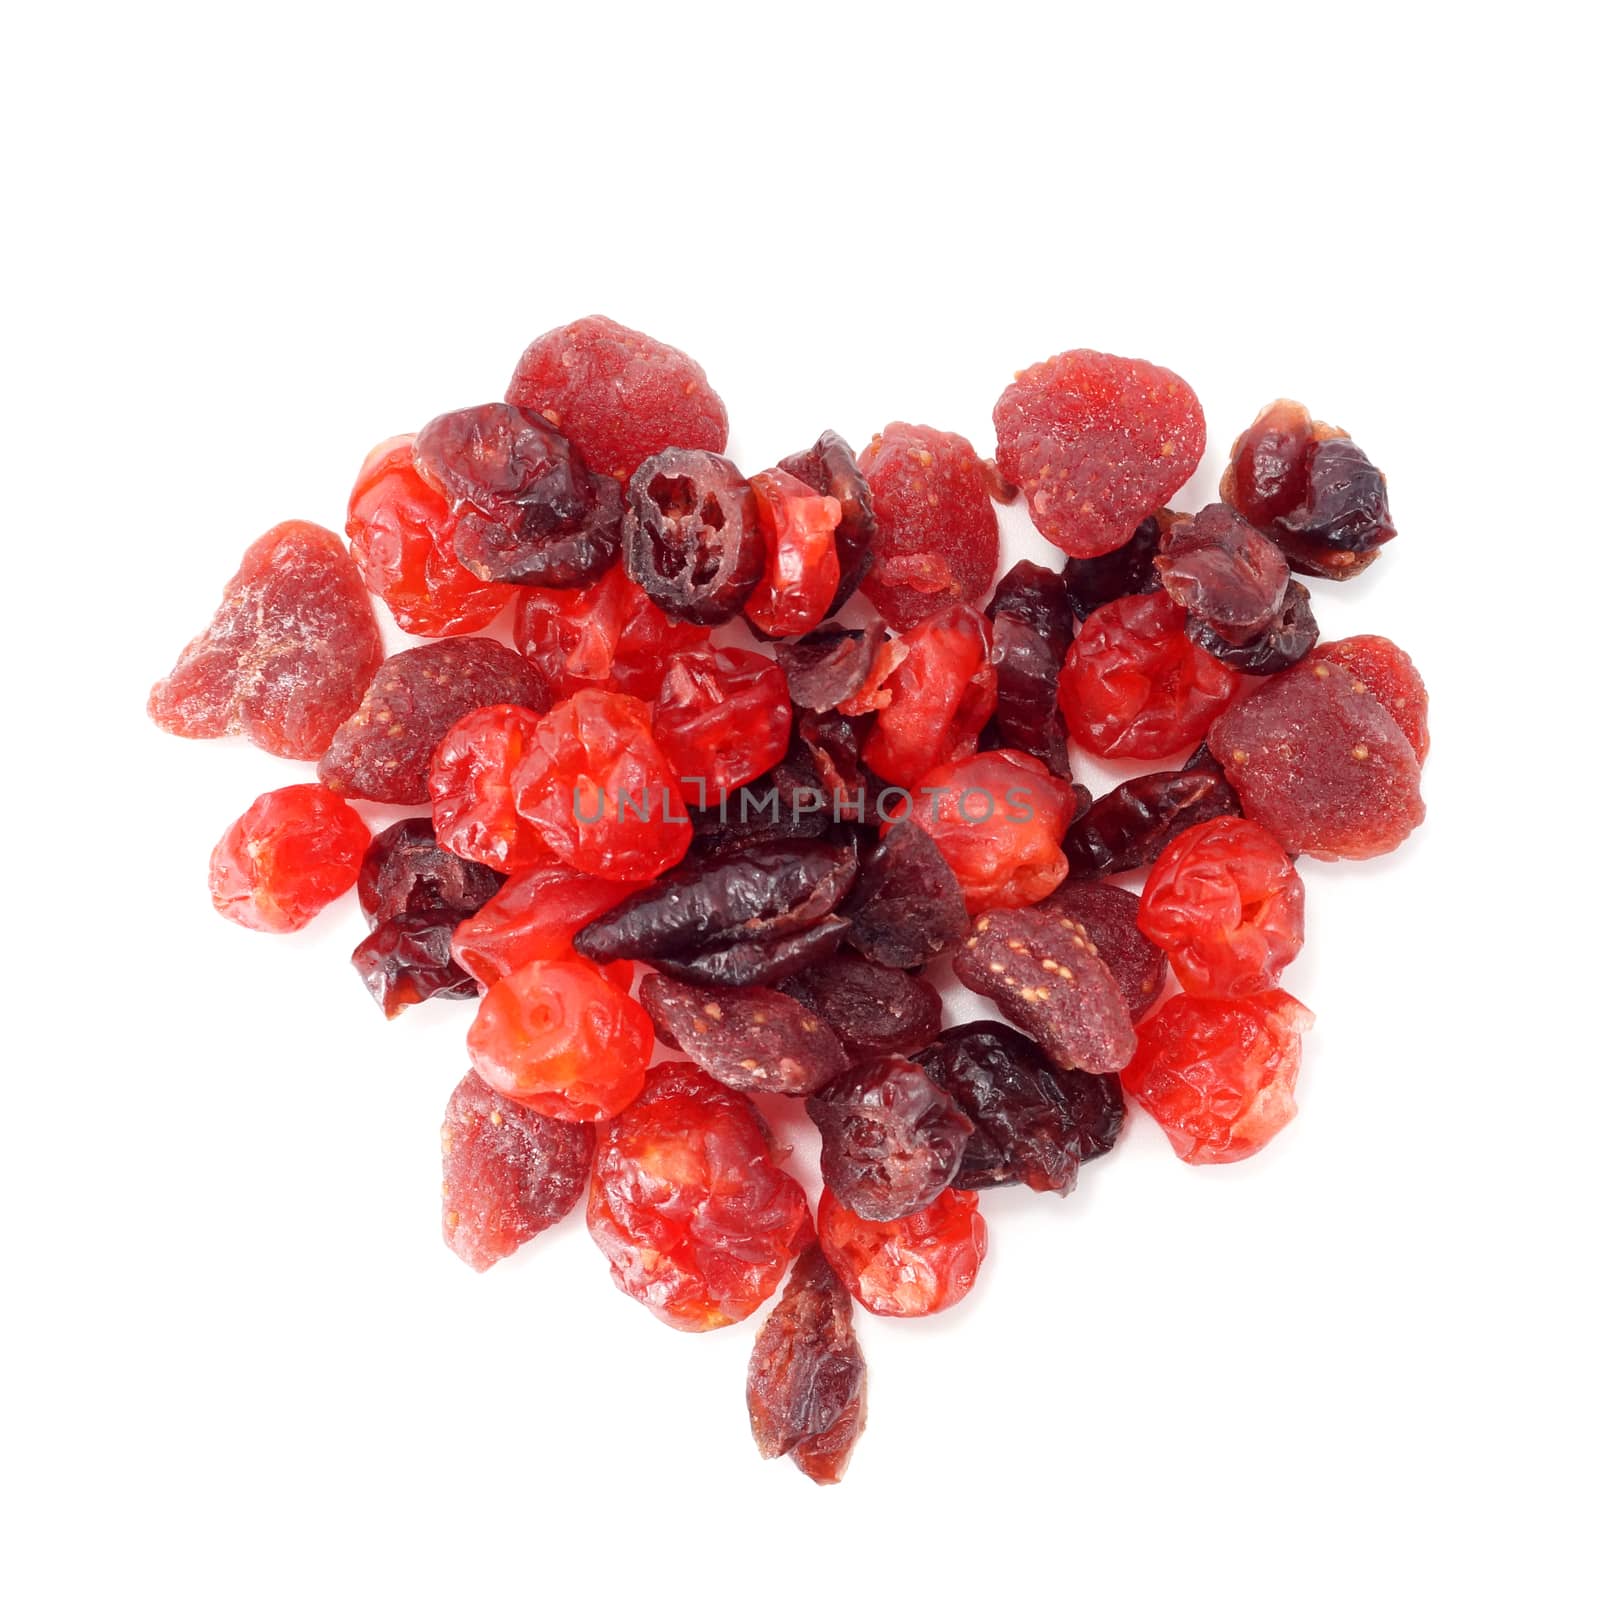 Dried mixed berries on isolate white background.